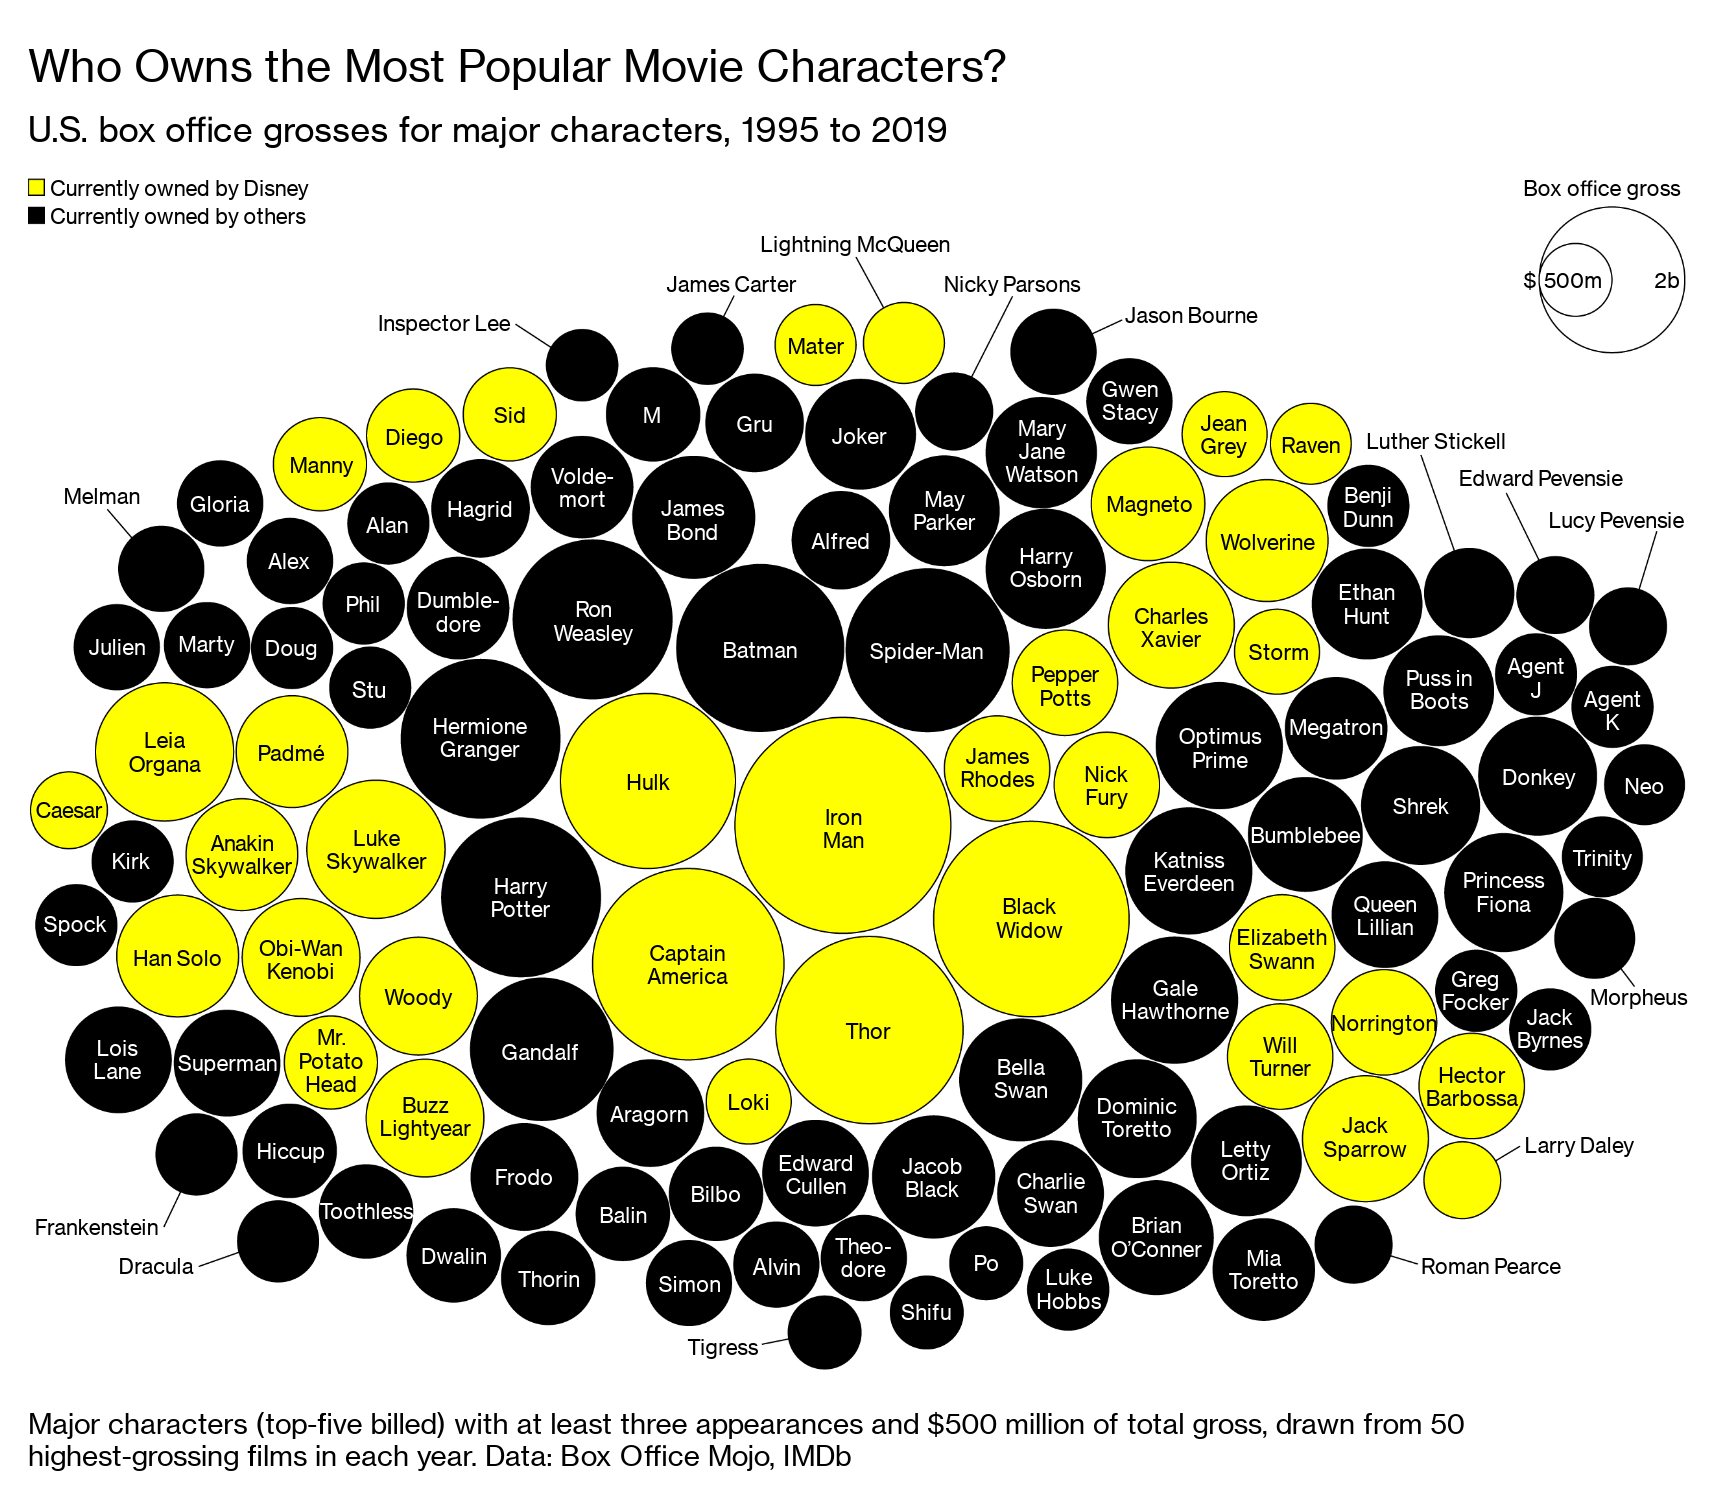 Enemies need superheroes. Protagonists need antagonists. Light produces shadow. Presence and absence. Good and evil. That's the duality of life. Pick your side.

(Infographic original description: “Major characters (top-five billed) with at least three appearances and $500 million of total gross, drawn from 50 highest-grossing films in each year. Data: Box Office Mojo, IMDb” | Infographic source: Bloomberg)